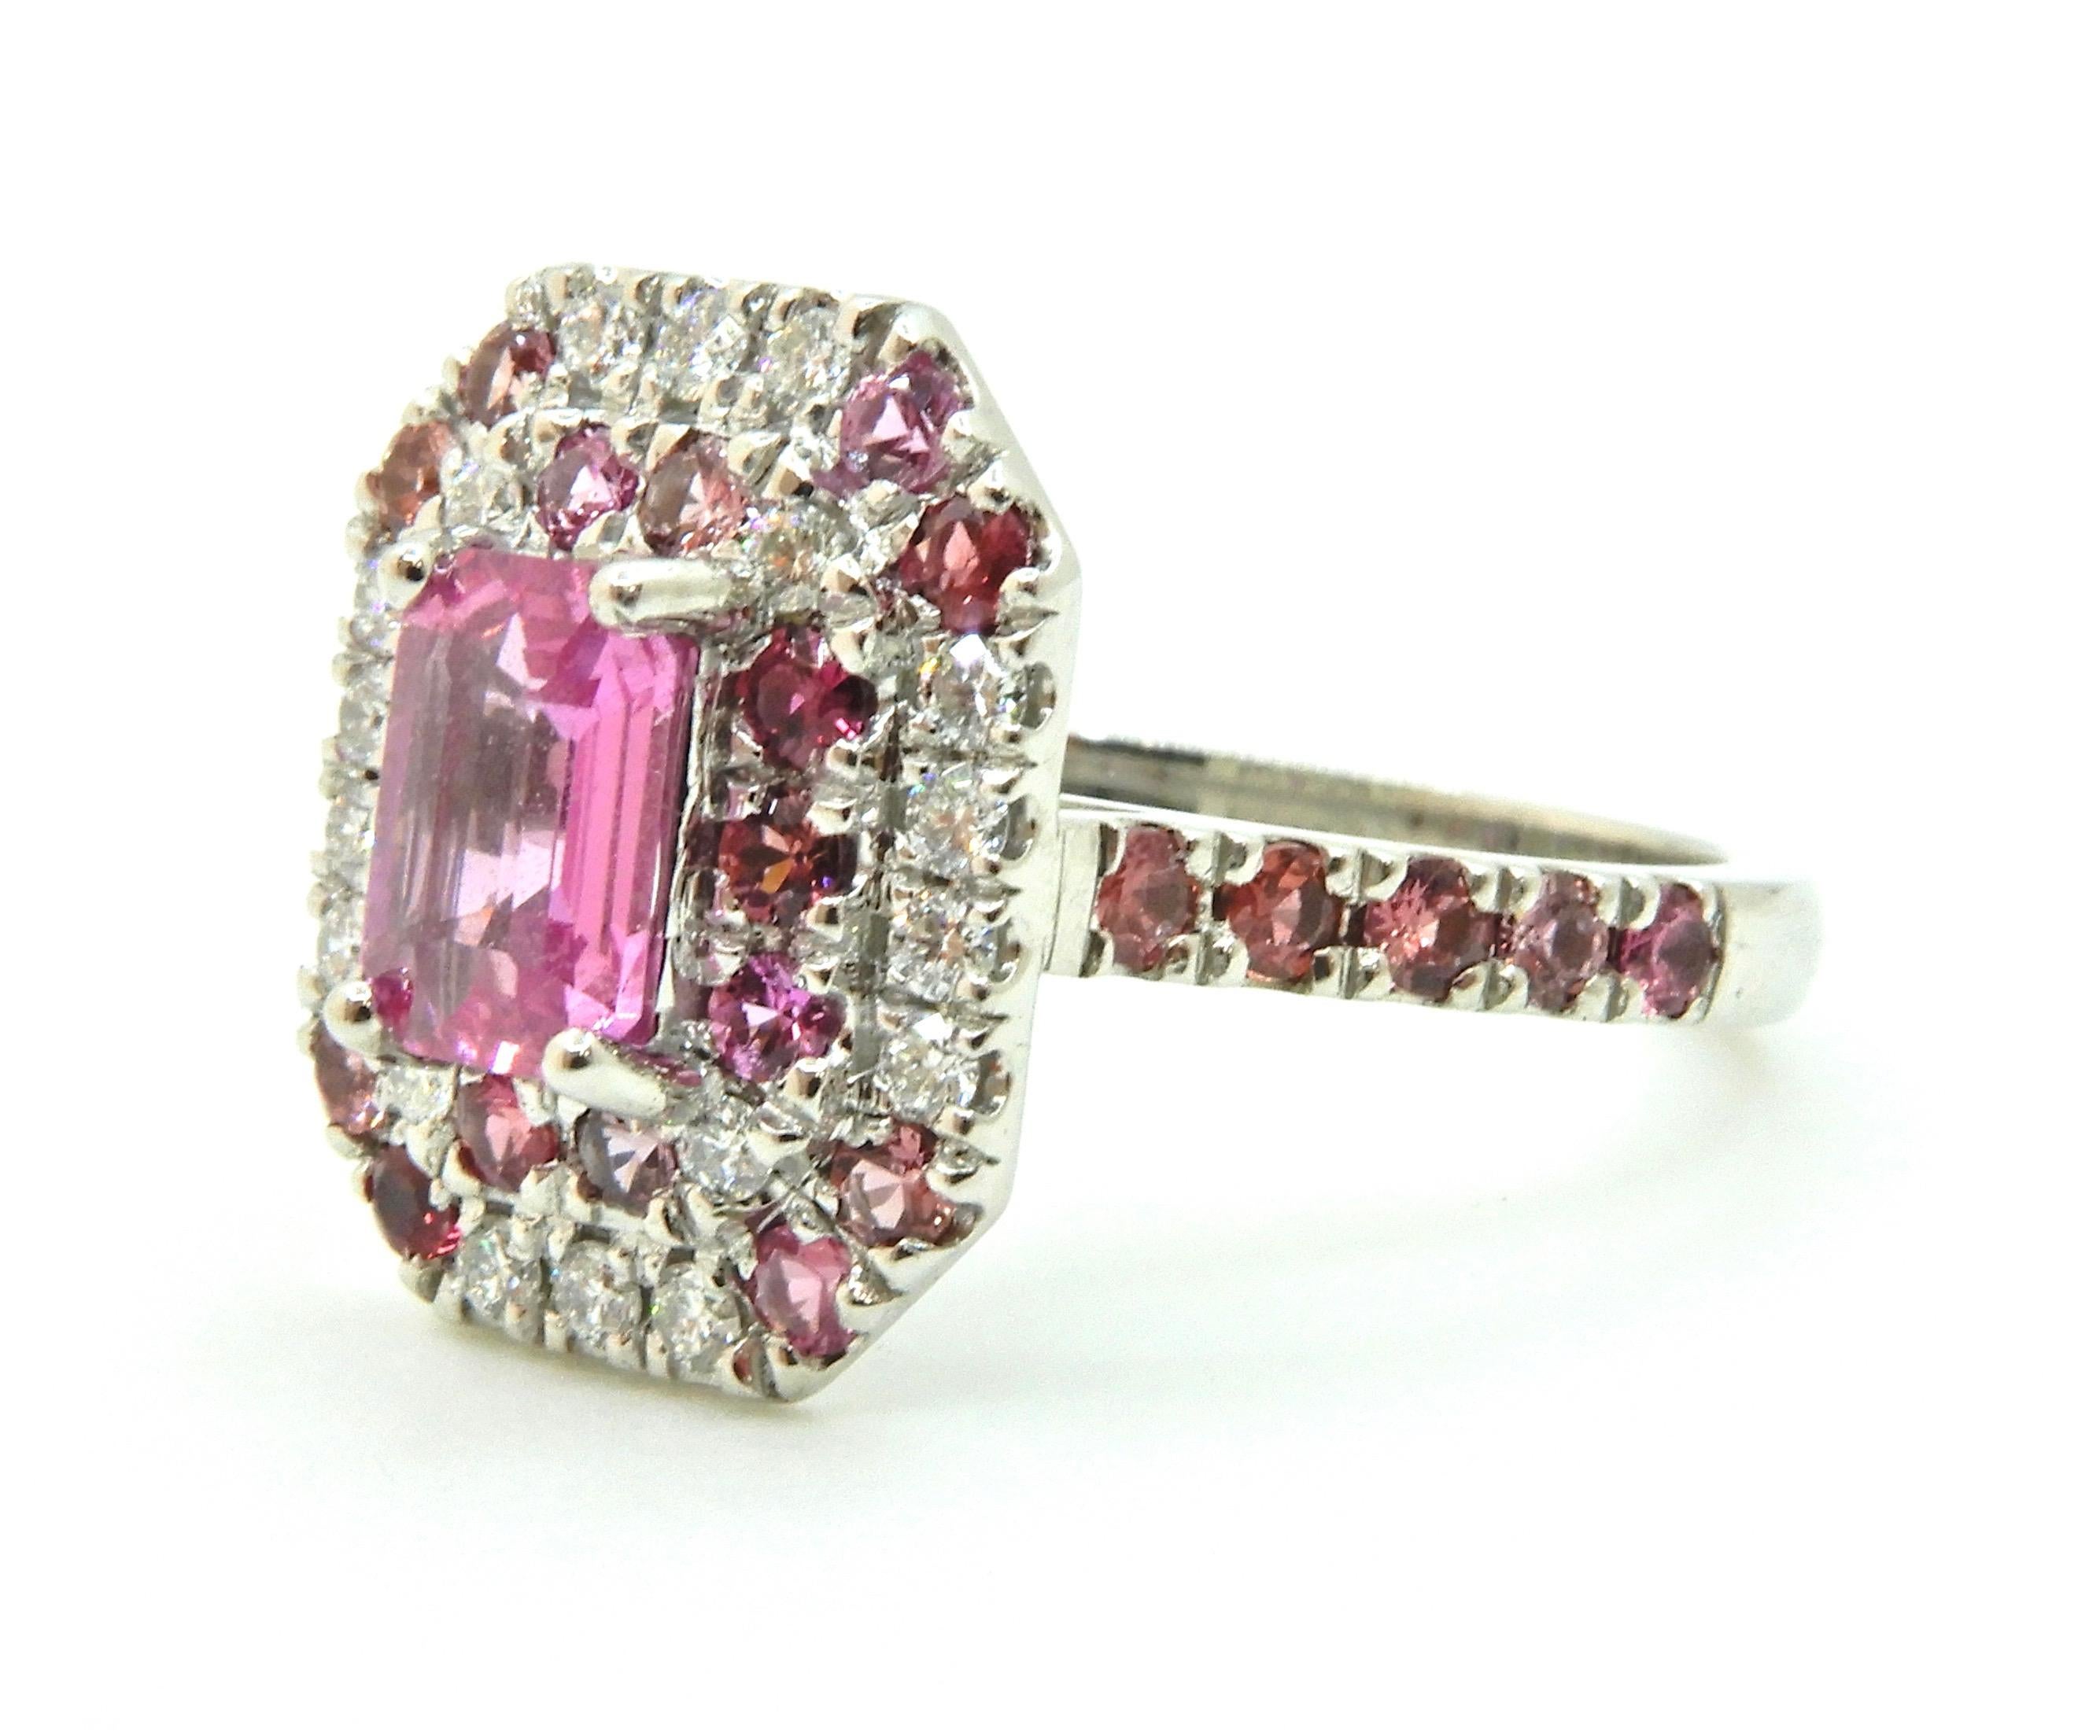 An explosion of pink and sparkles, this 0.82 Carat Pink Sapphire Diamond Double Halo 18 Carat White Gold Engagement Ring is a gorgeous one-off piece.

The rounded, flat edge band splits into an under-rail and upswept shoulders, each set with five